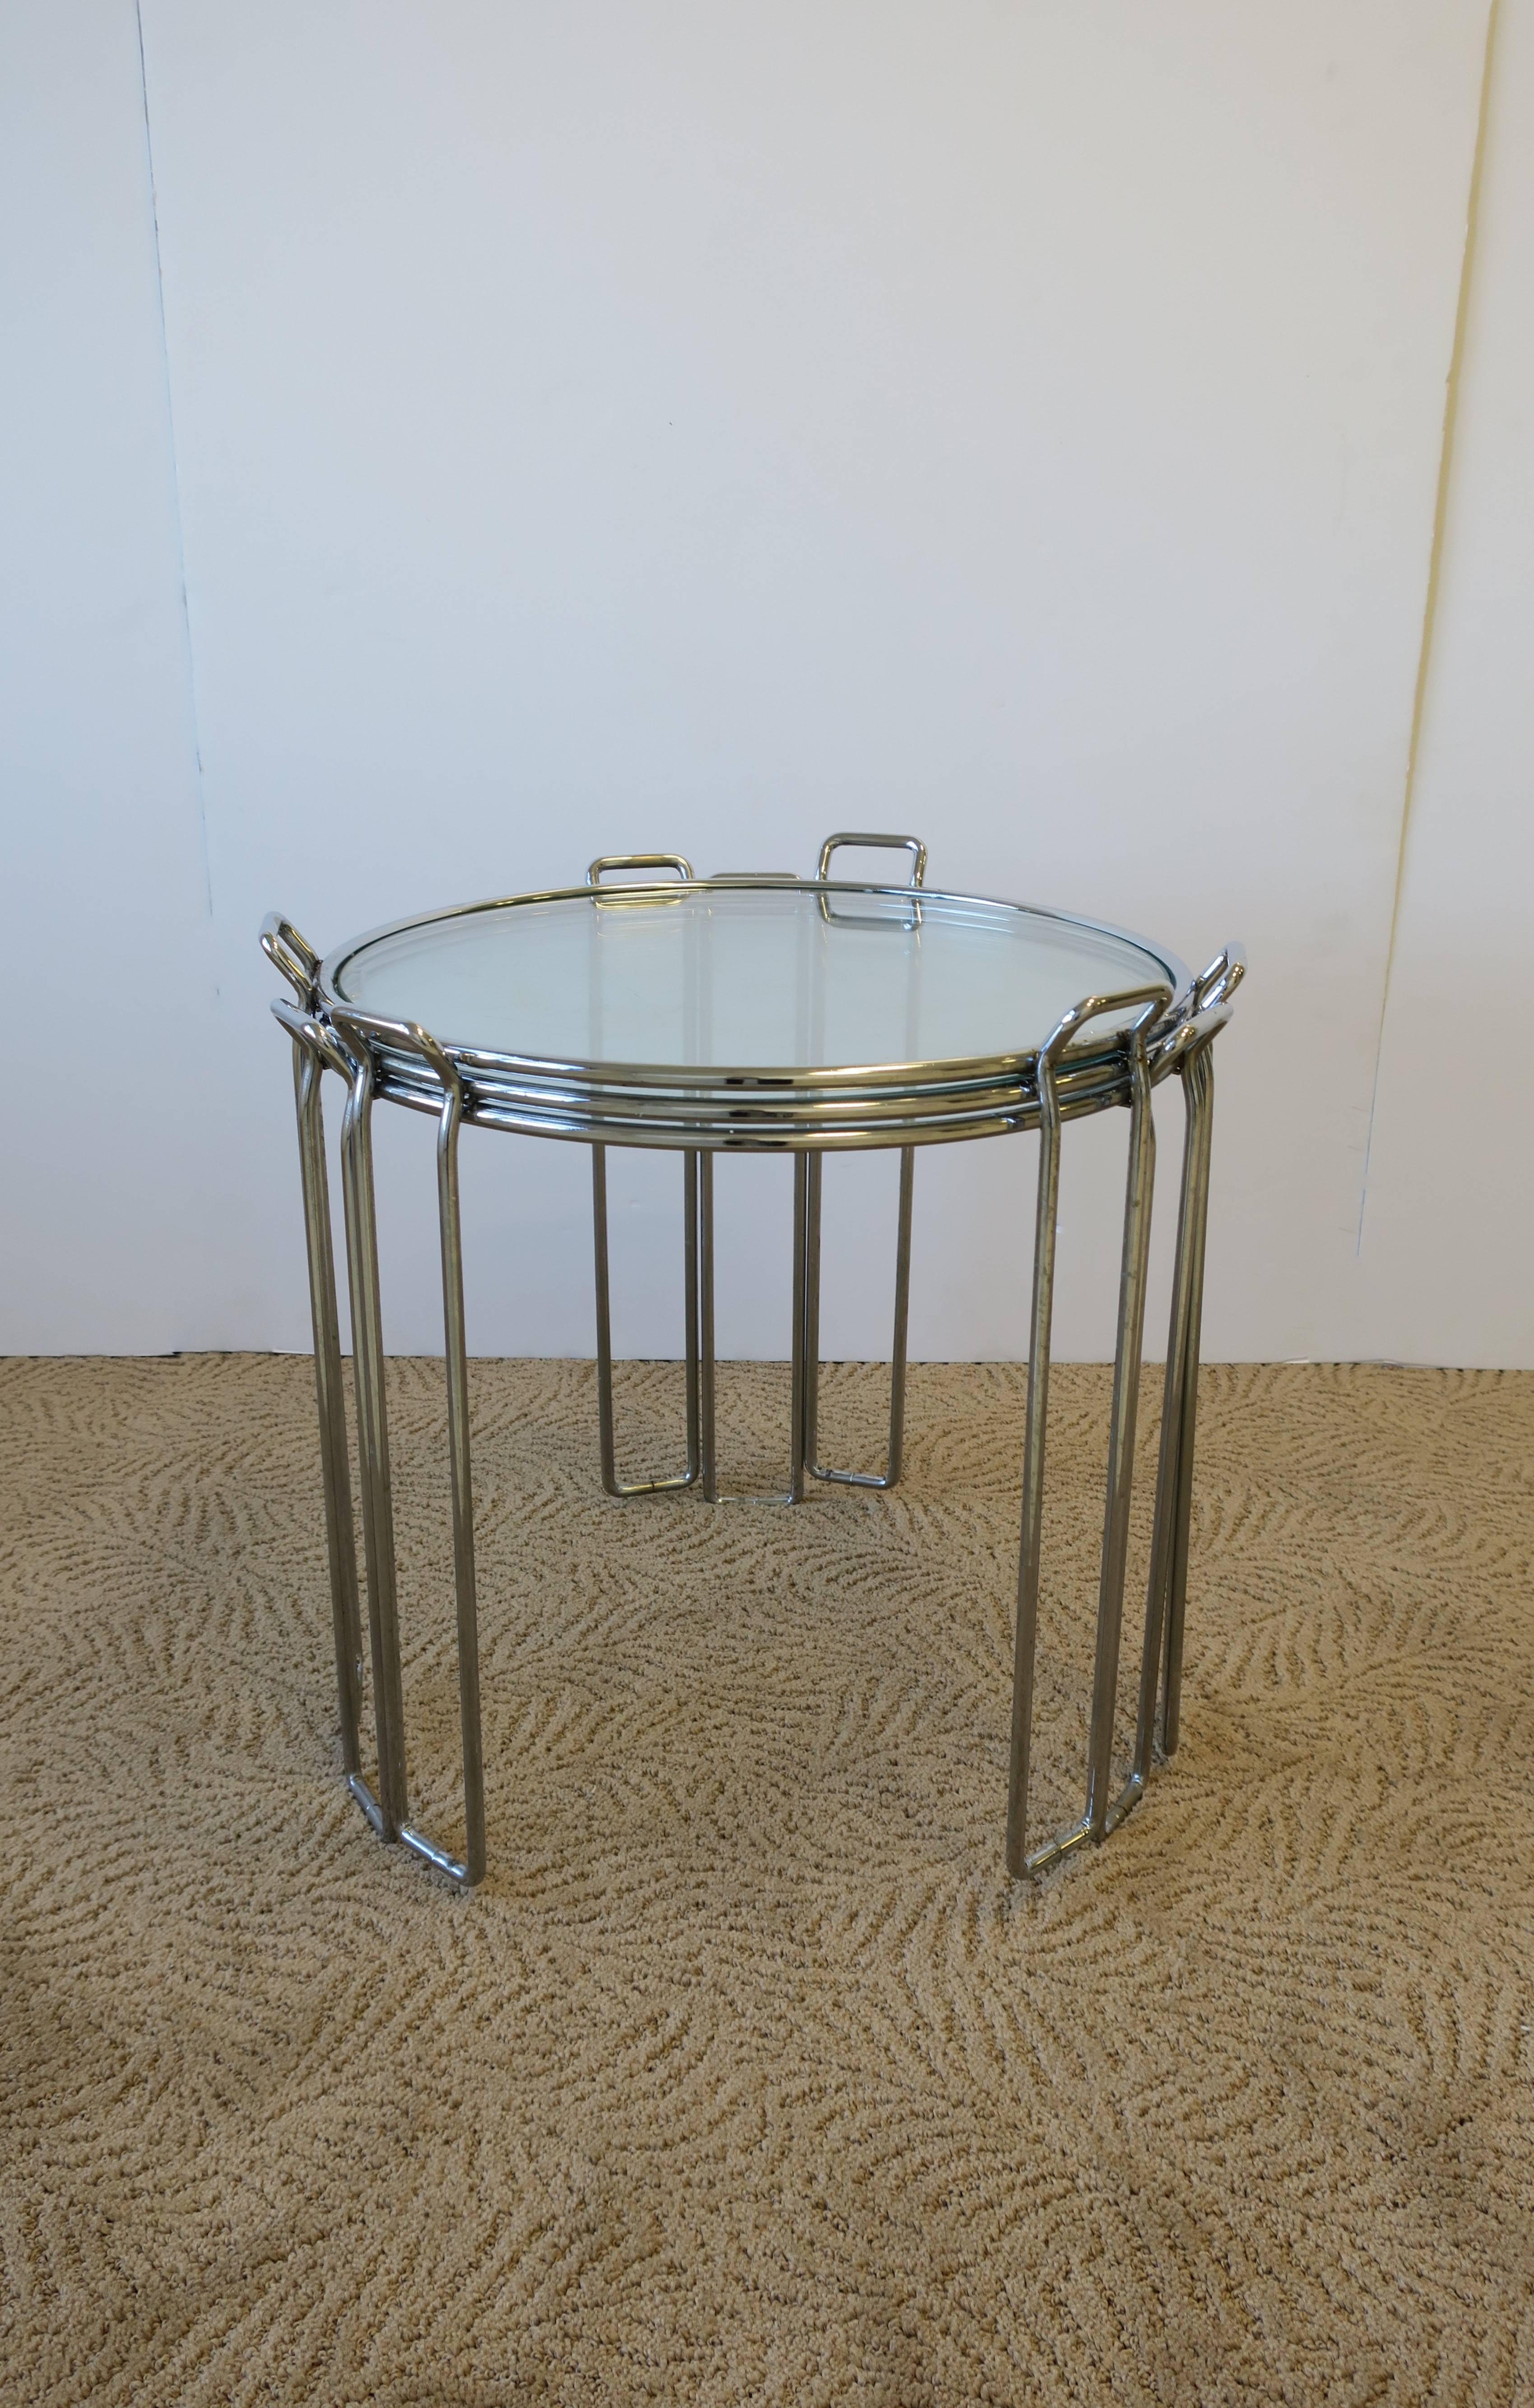 Vintage Modern trio (3) of side, nesting or stacking tables, with tubular chrome frames and circular glass tops. Each table frame is made with three small chrome handles for easy lifting or stacking. Convenient enough to use one side table at a time